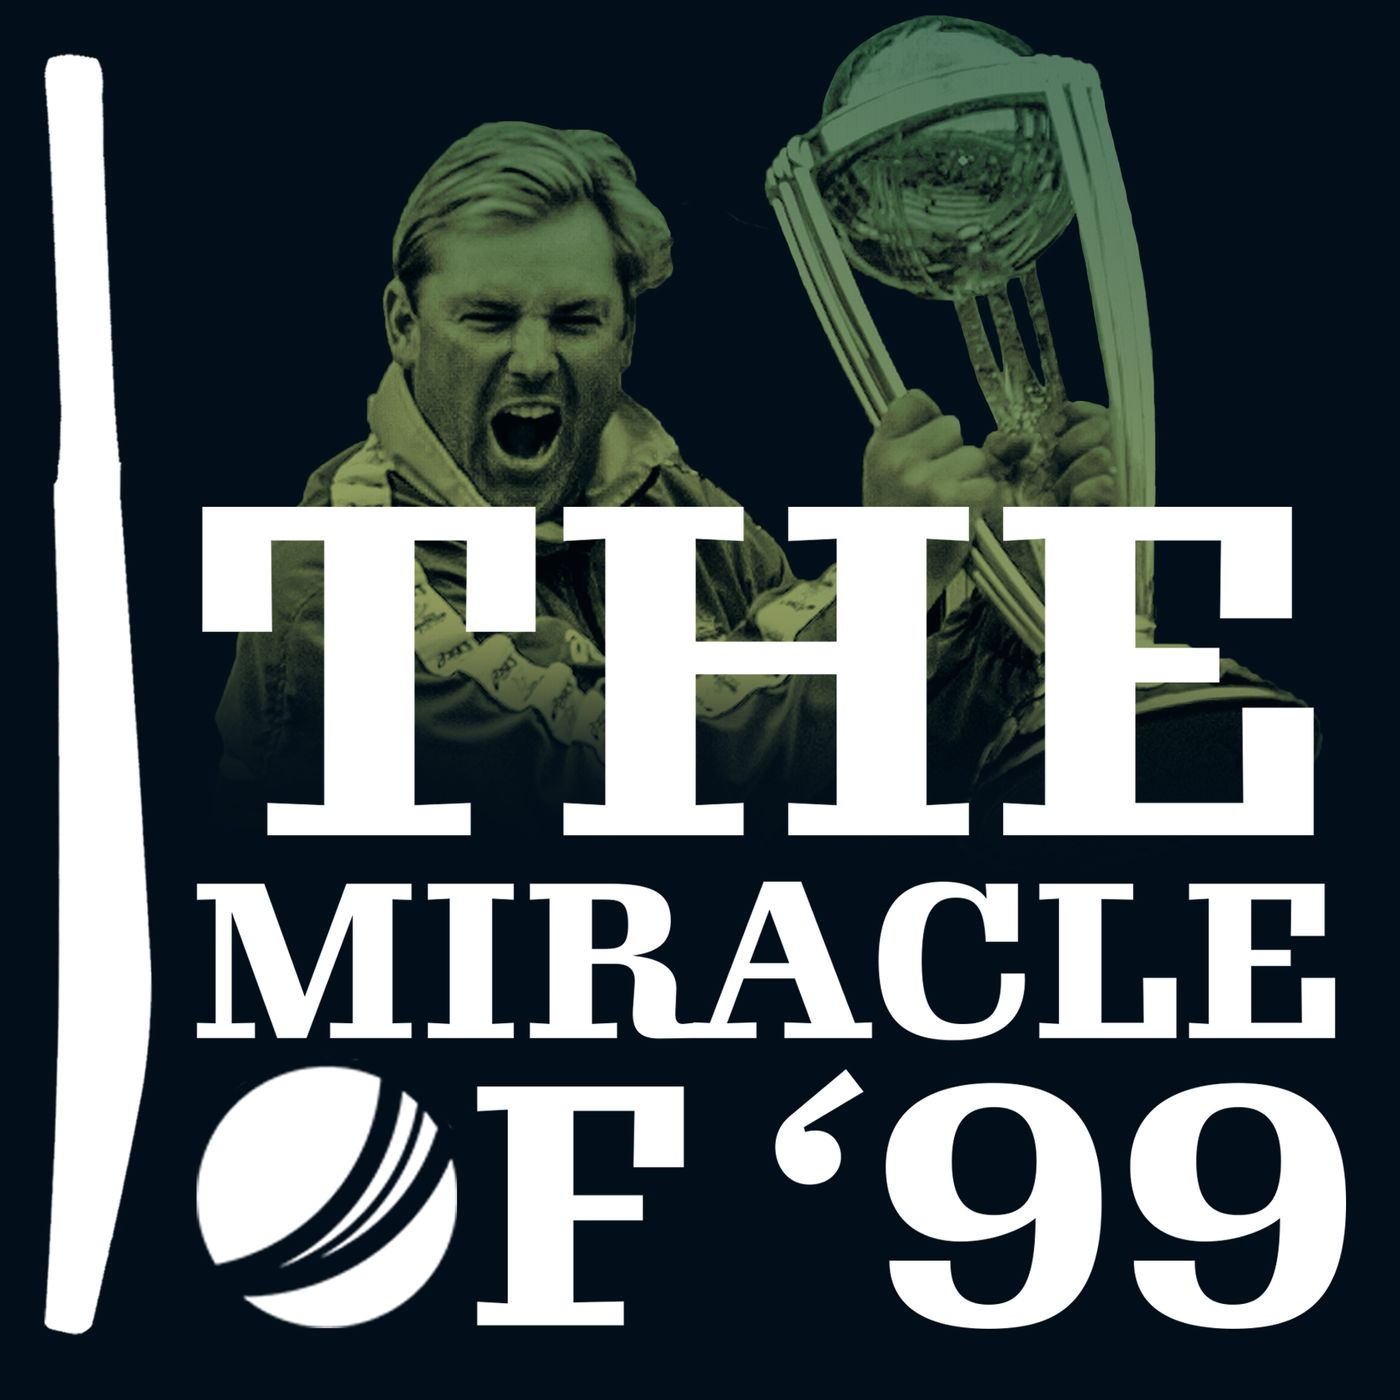 Introducing: The Miracle of ’99